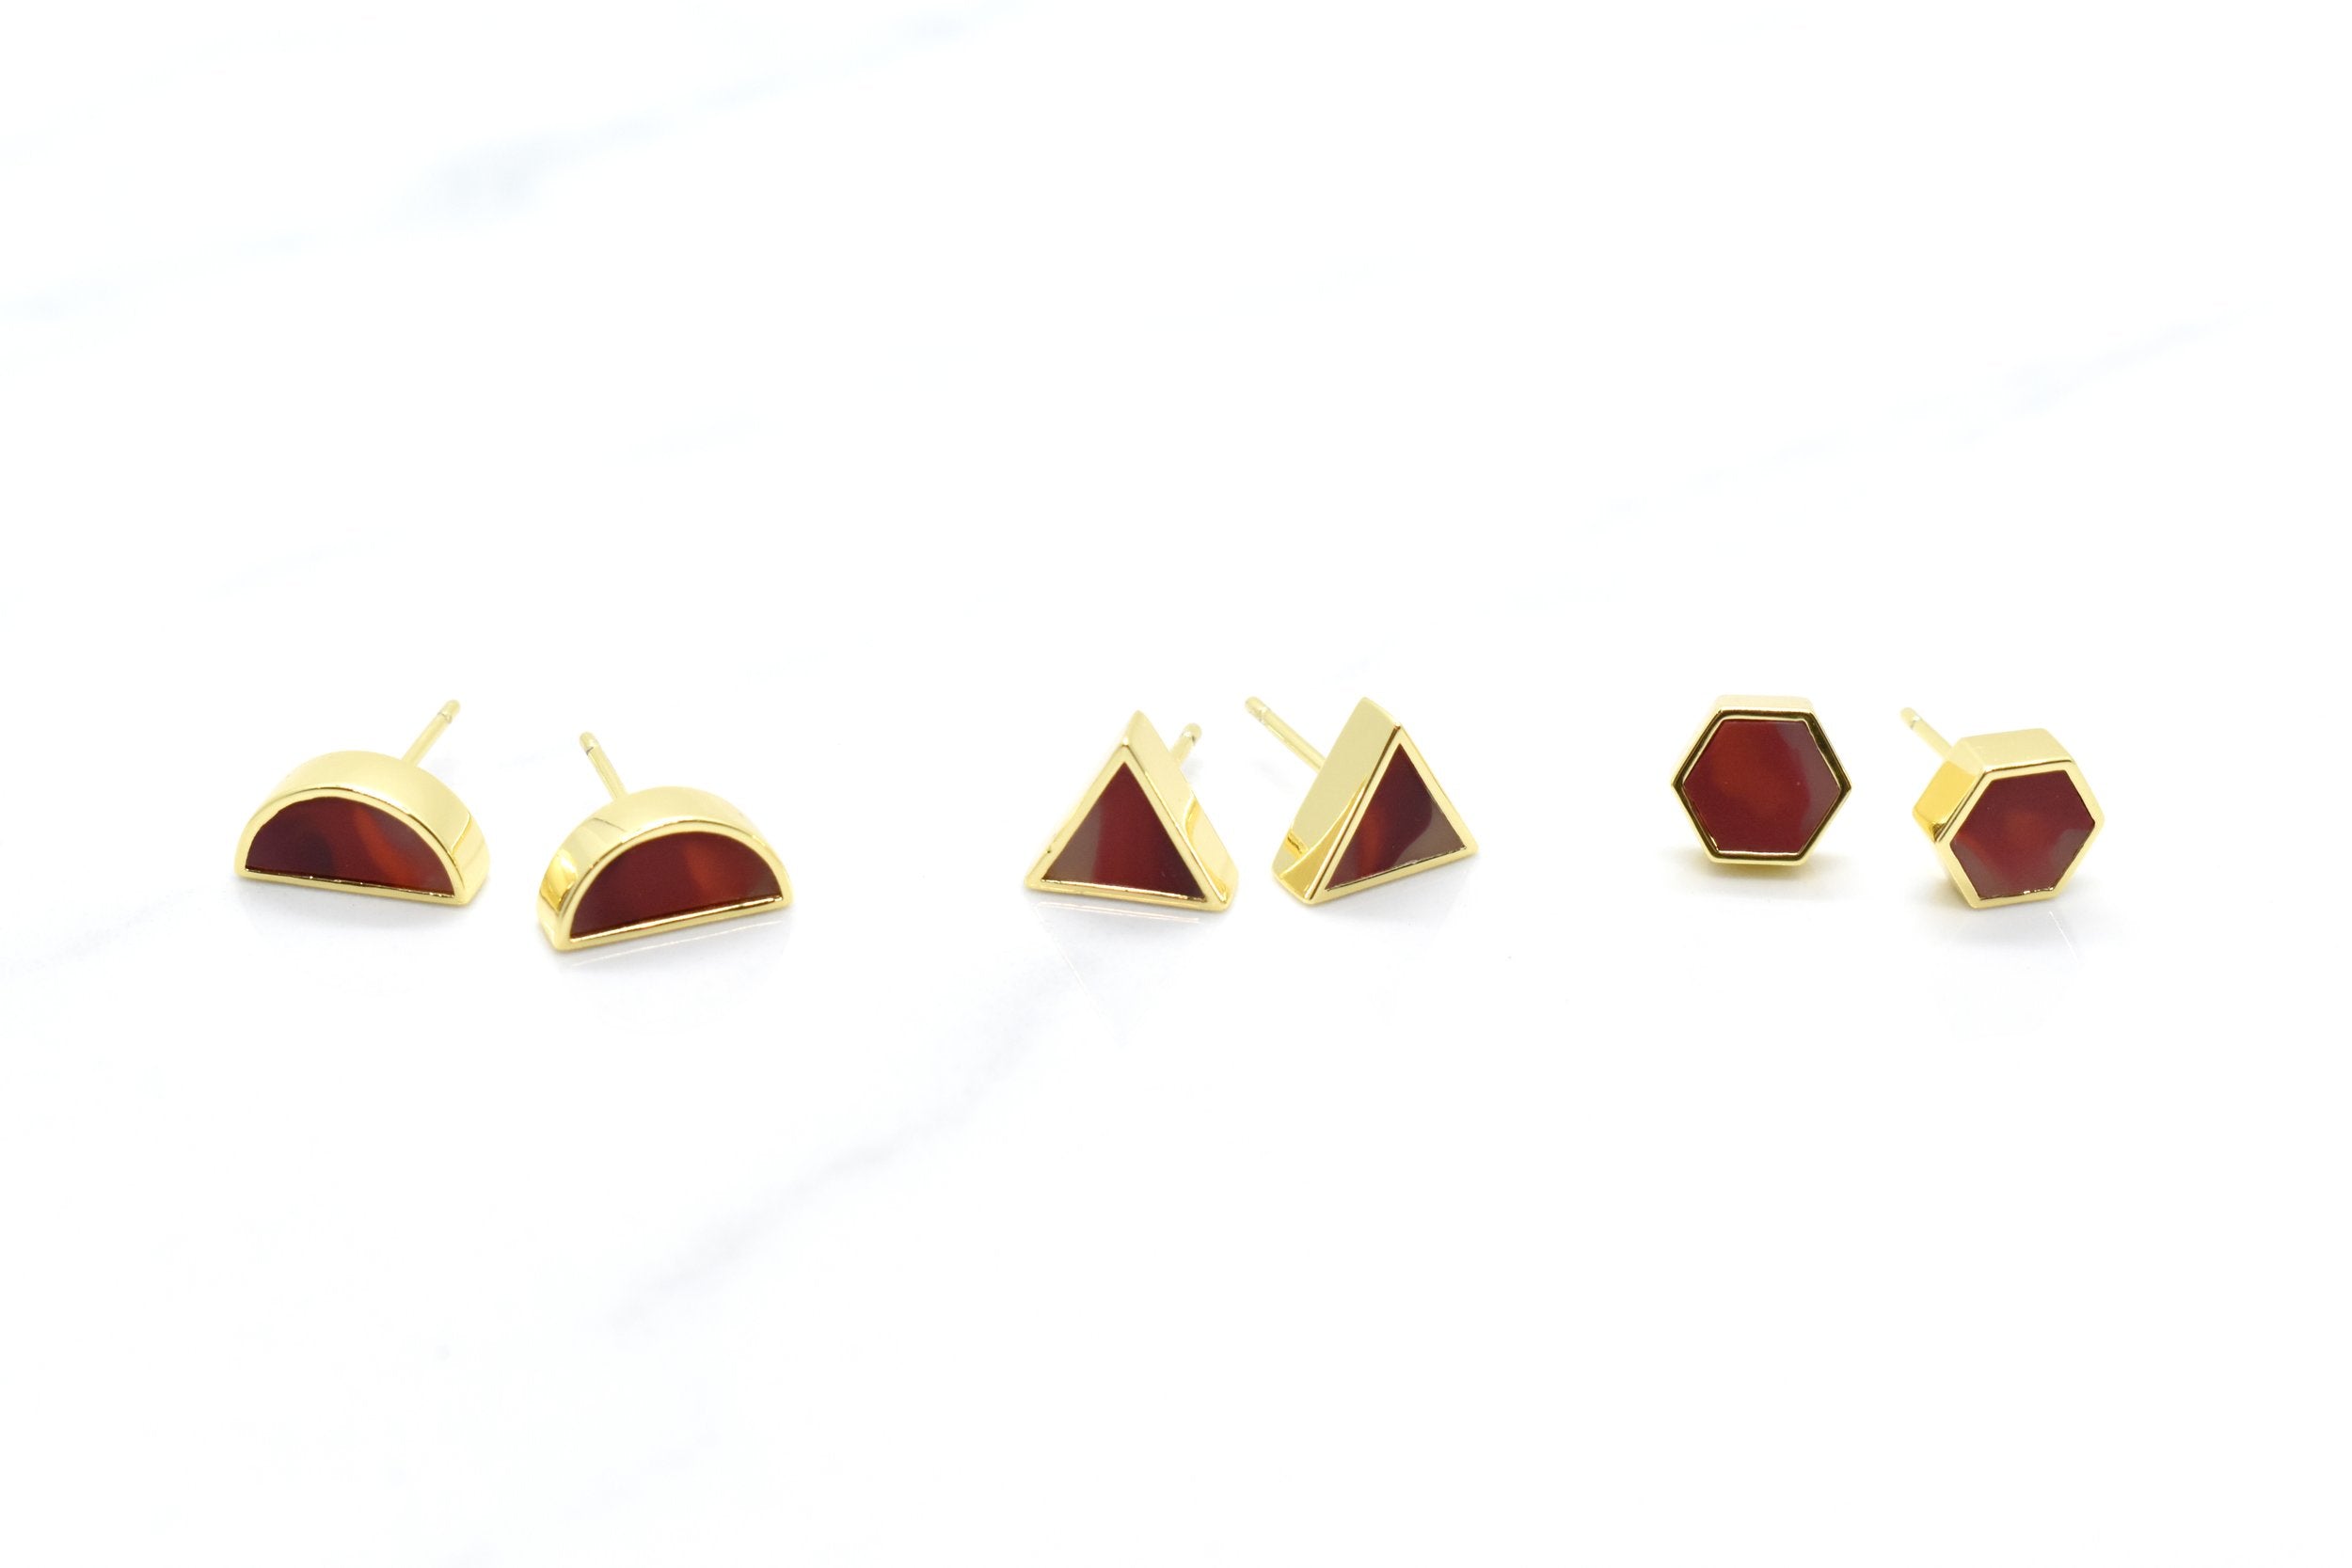 set of three geometric stud earrings in hexagons triangles and half moon shapes all filled with hand marbled garnet gemstone clay, looks like ruby earrings